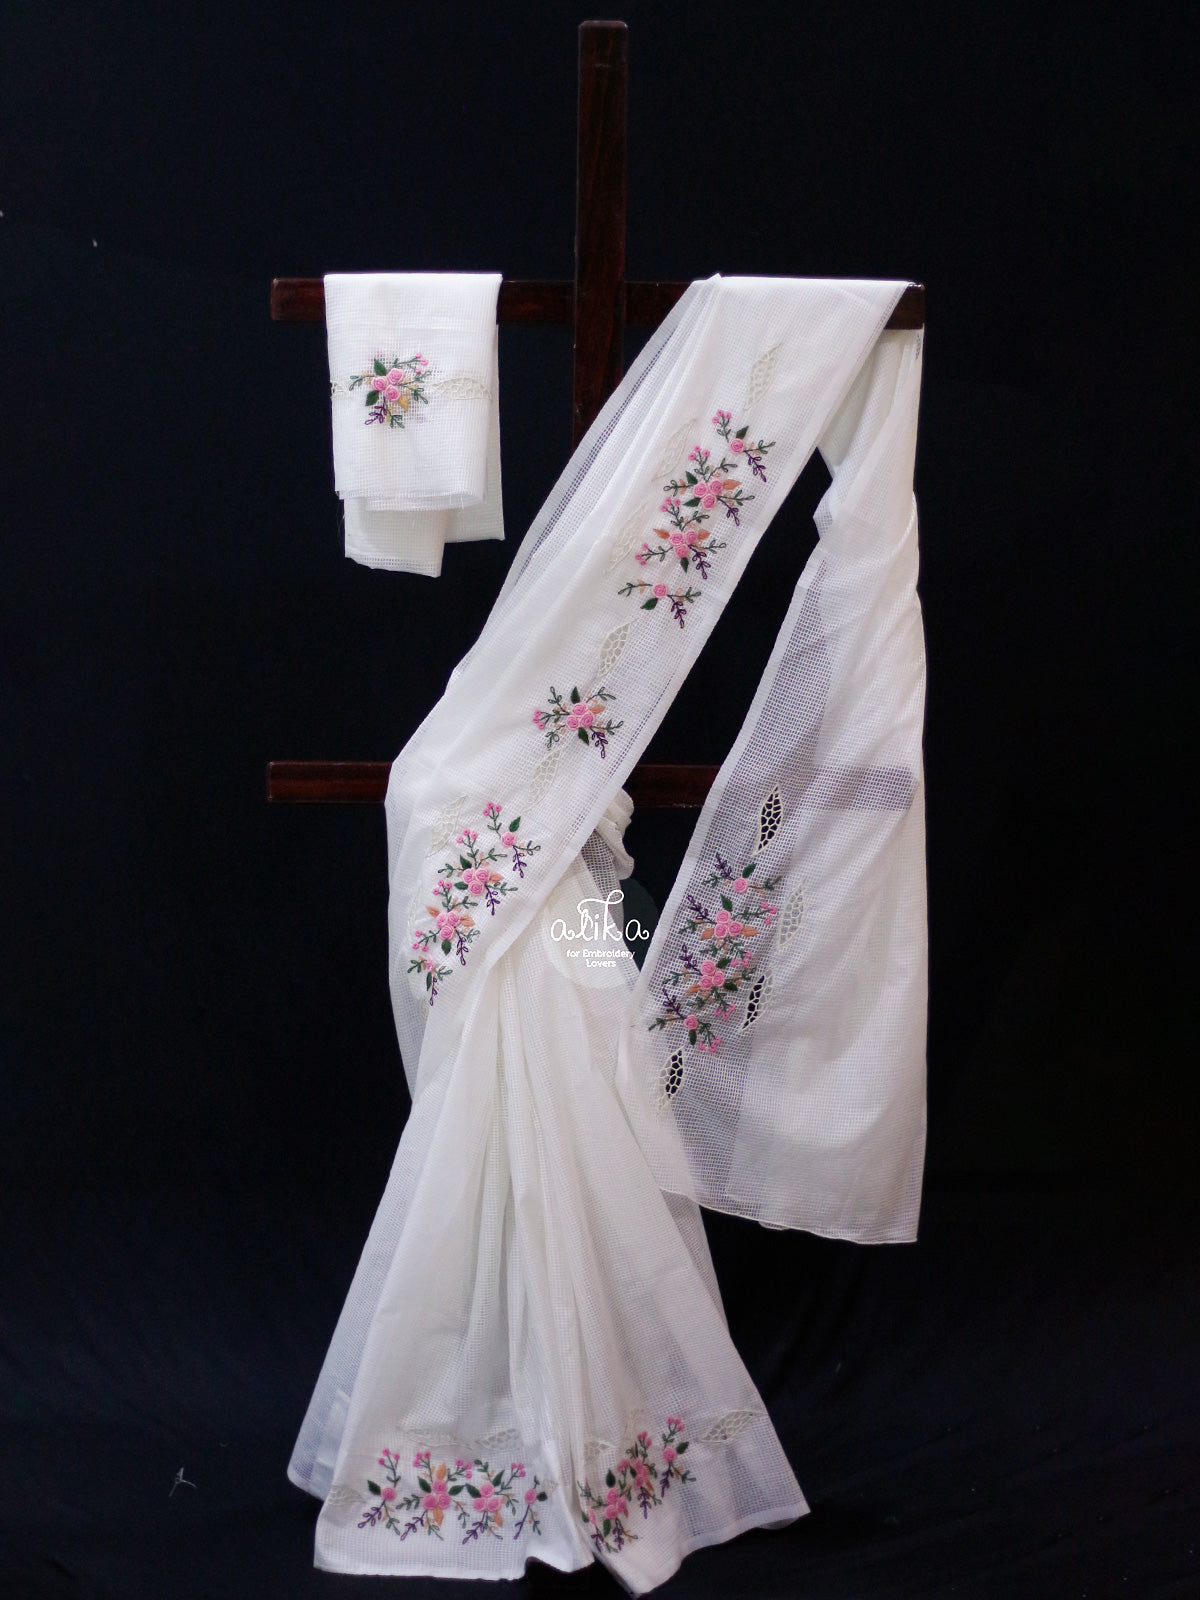 "Exquisite White Semi Check Tussar Silk Saree with Cutwork and Hand Embroidery - Elegant Indian Ethnic Wear"